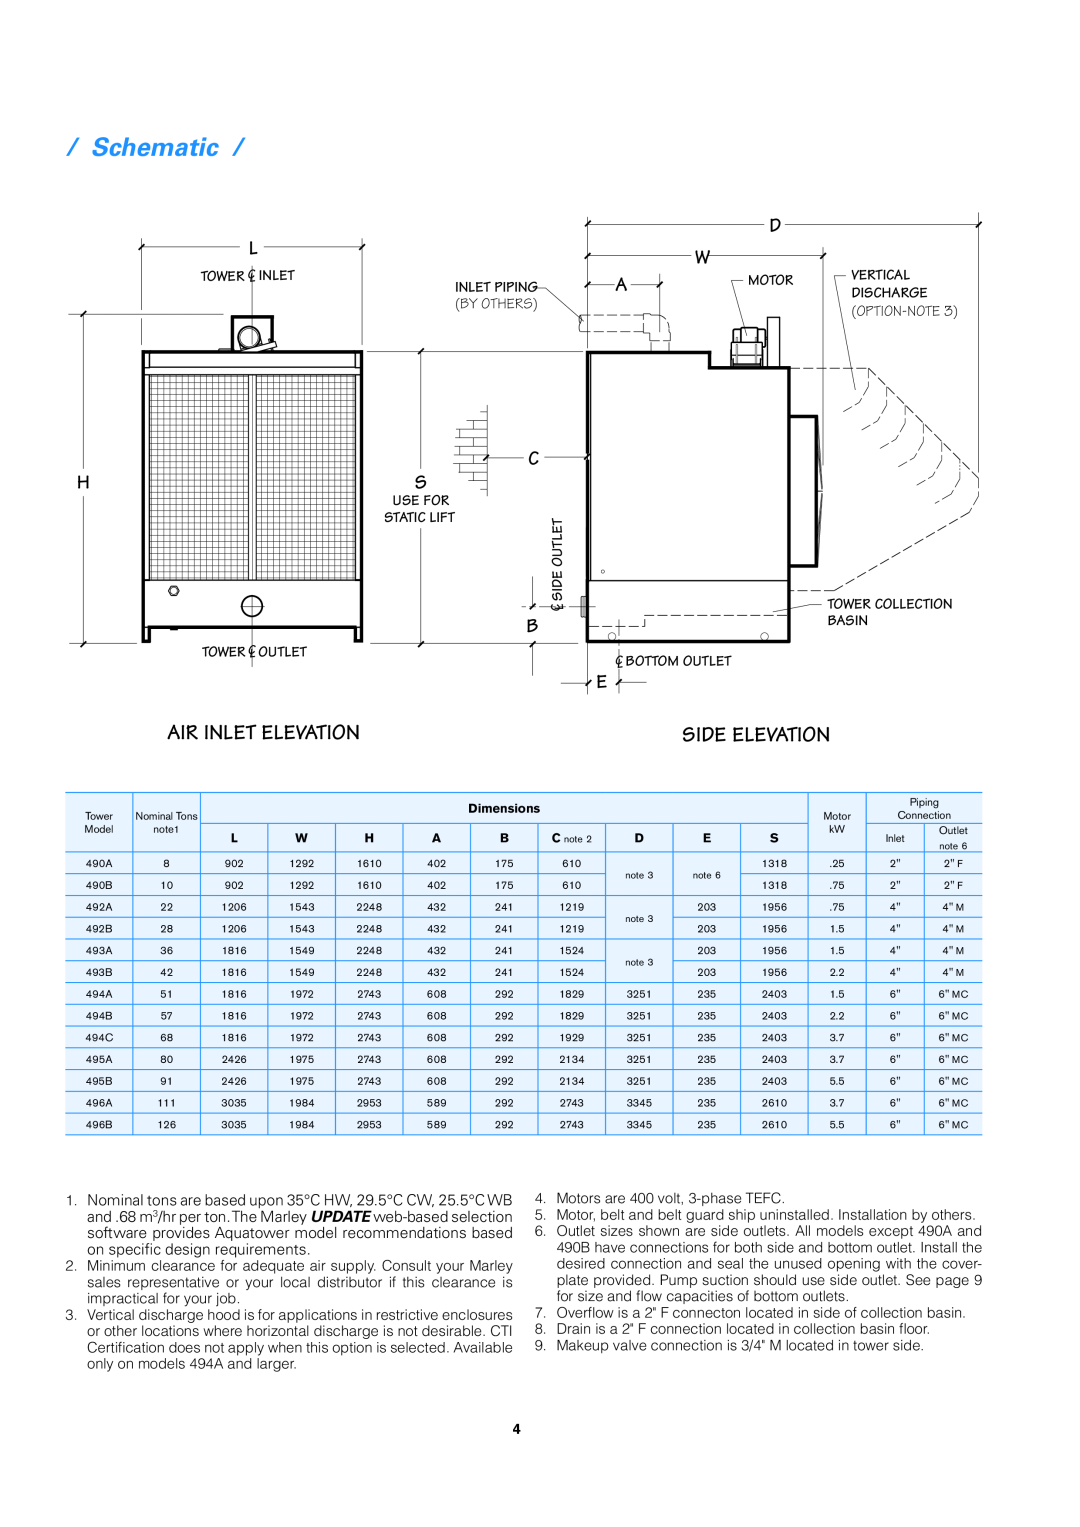 SPX Cooling Technologies Marley Aquatower Schematic, Air Inlet Elevation, Side Elevation, Tower Cl Inlet, Inlet Piping 